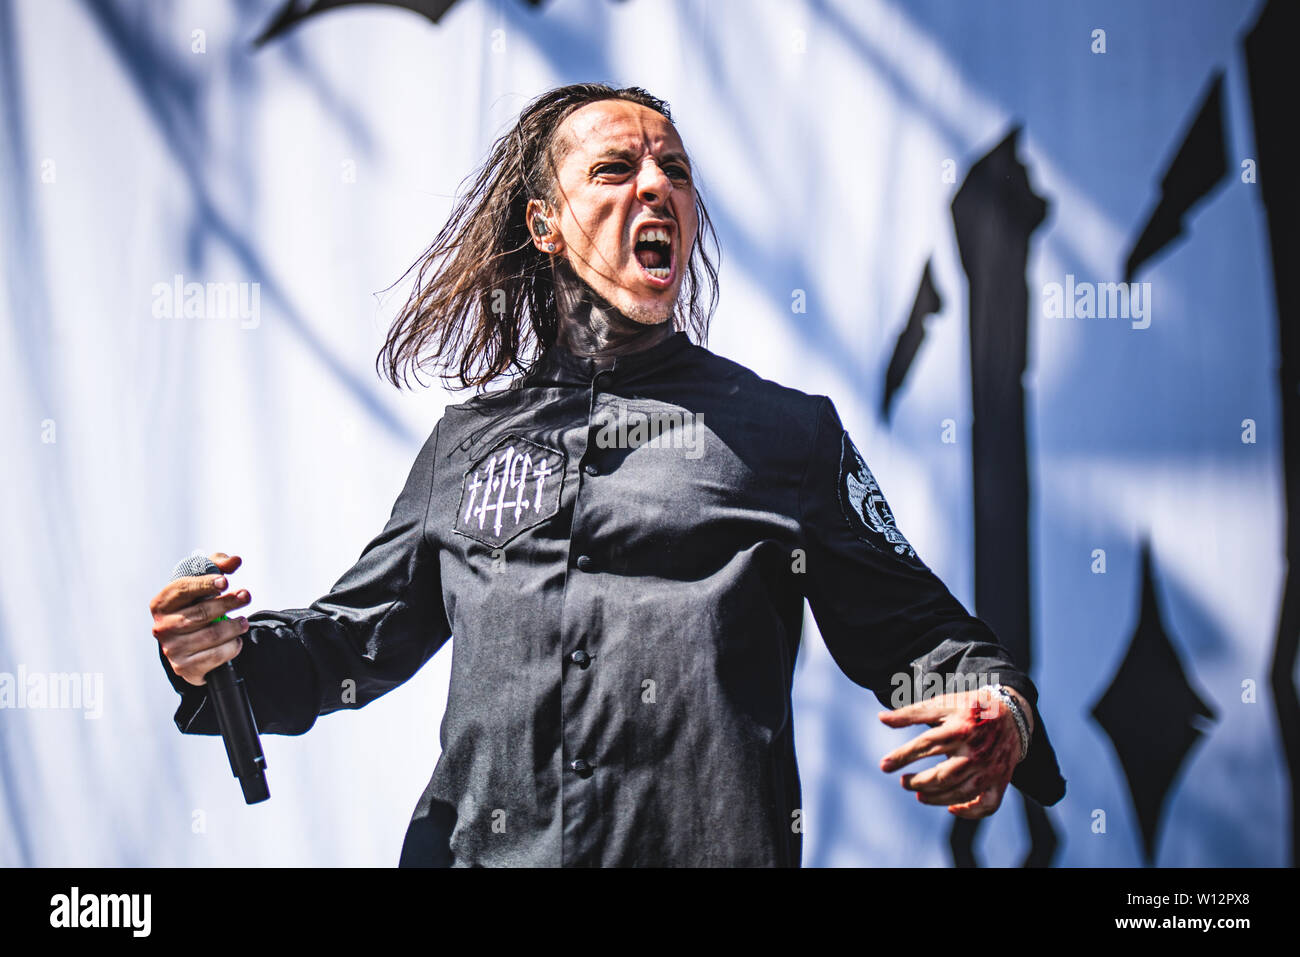 Andrea Ferro, singer of the Italian gothic metal band Lacuna Coil,  performing live on stage in Bologna, at the Bologna Sonic Park 2019 first  ever edit Stock Photo - Alamy